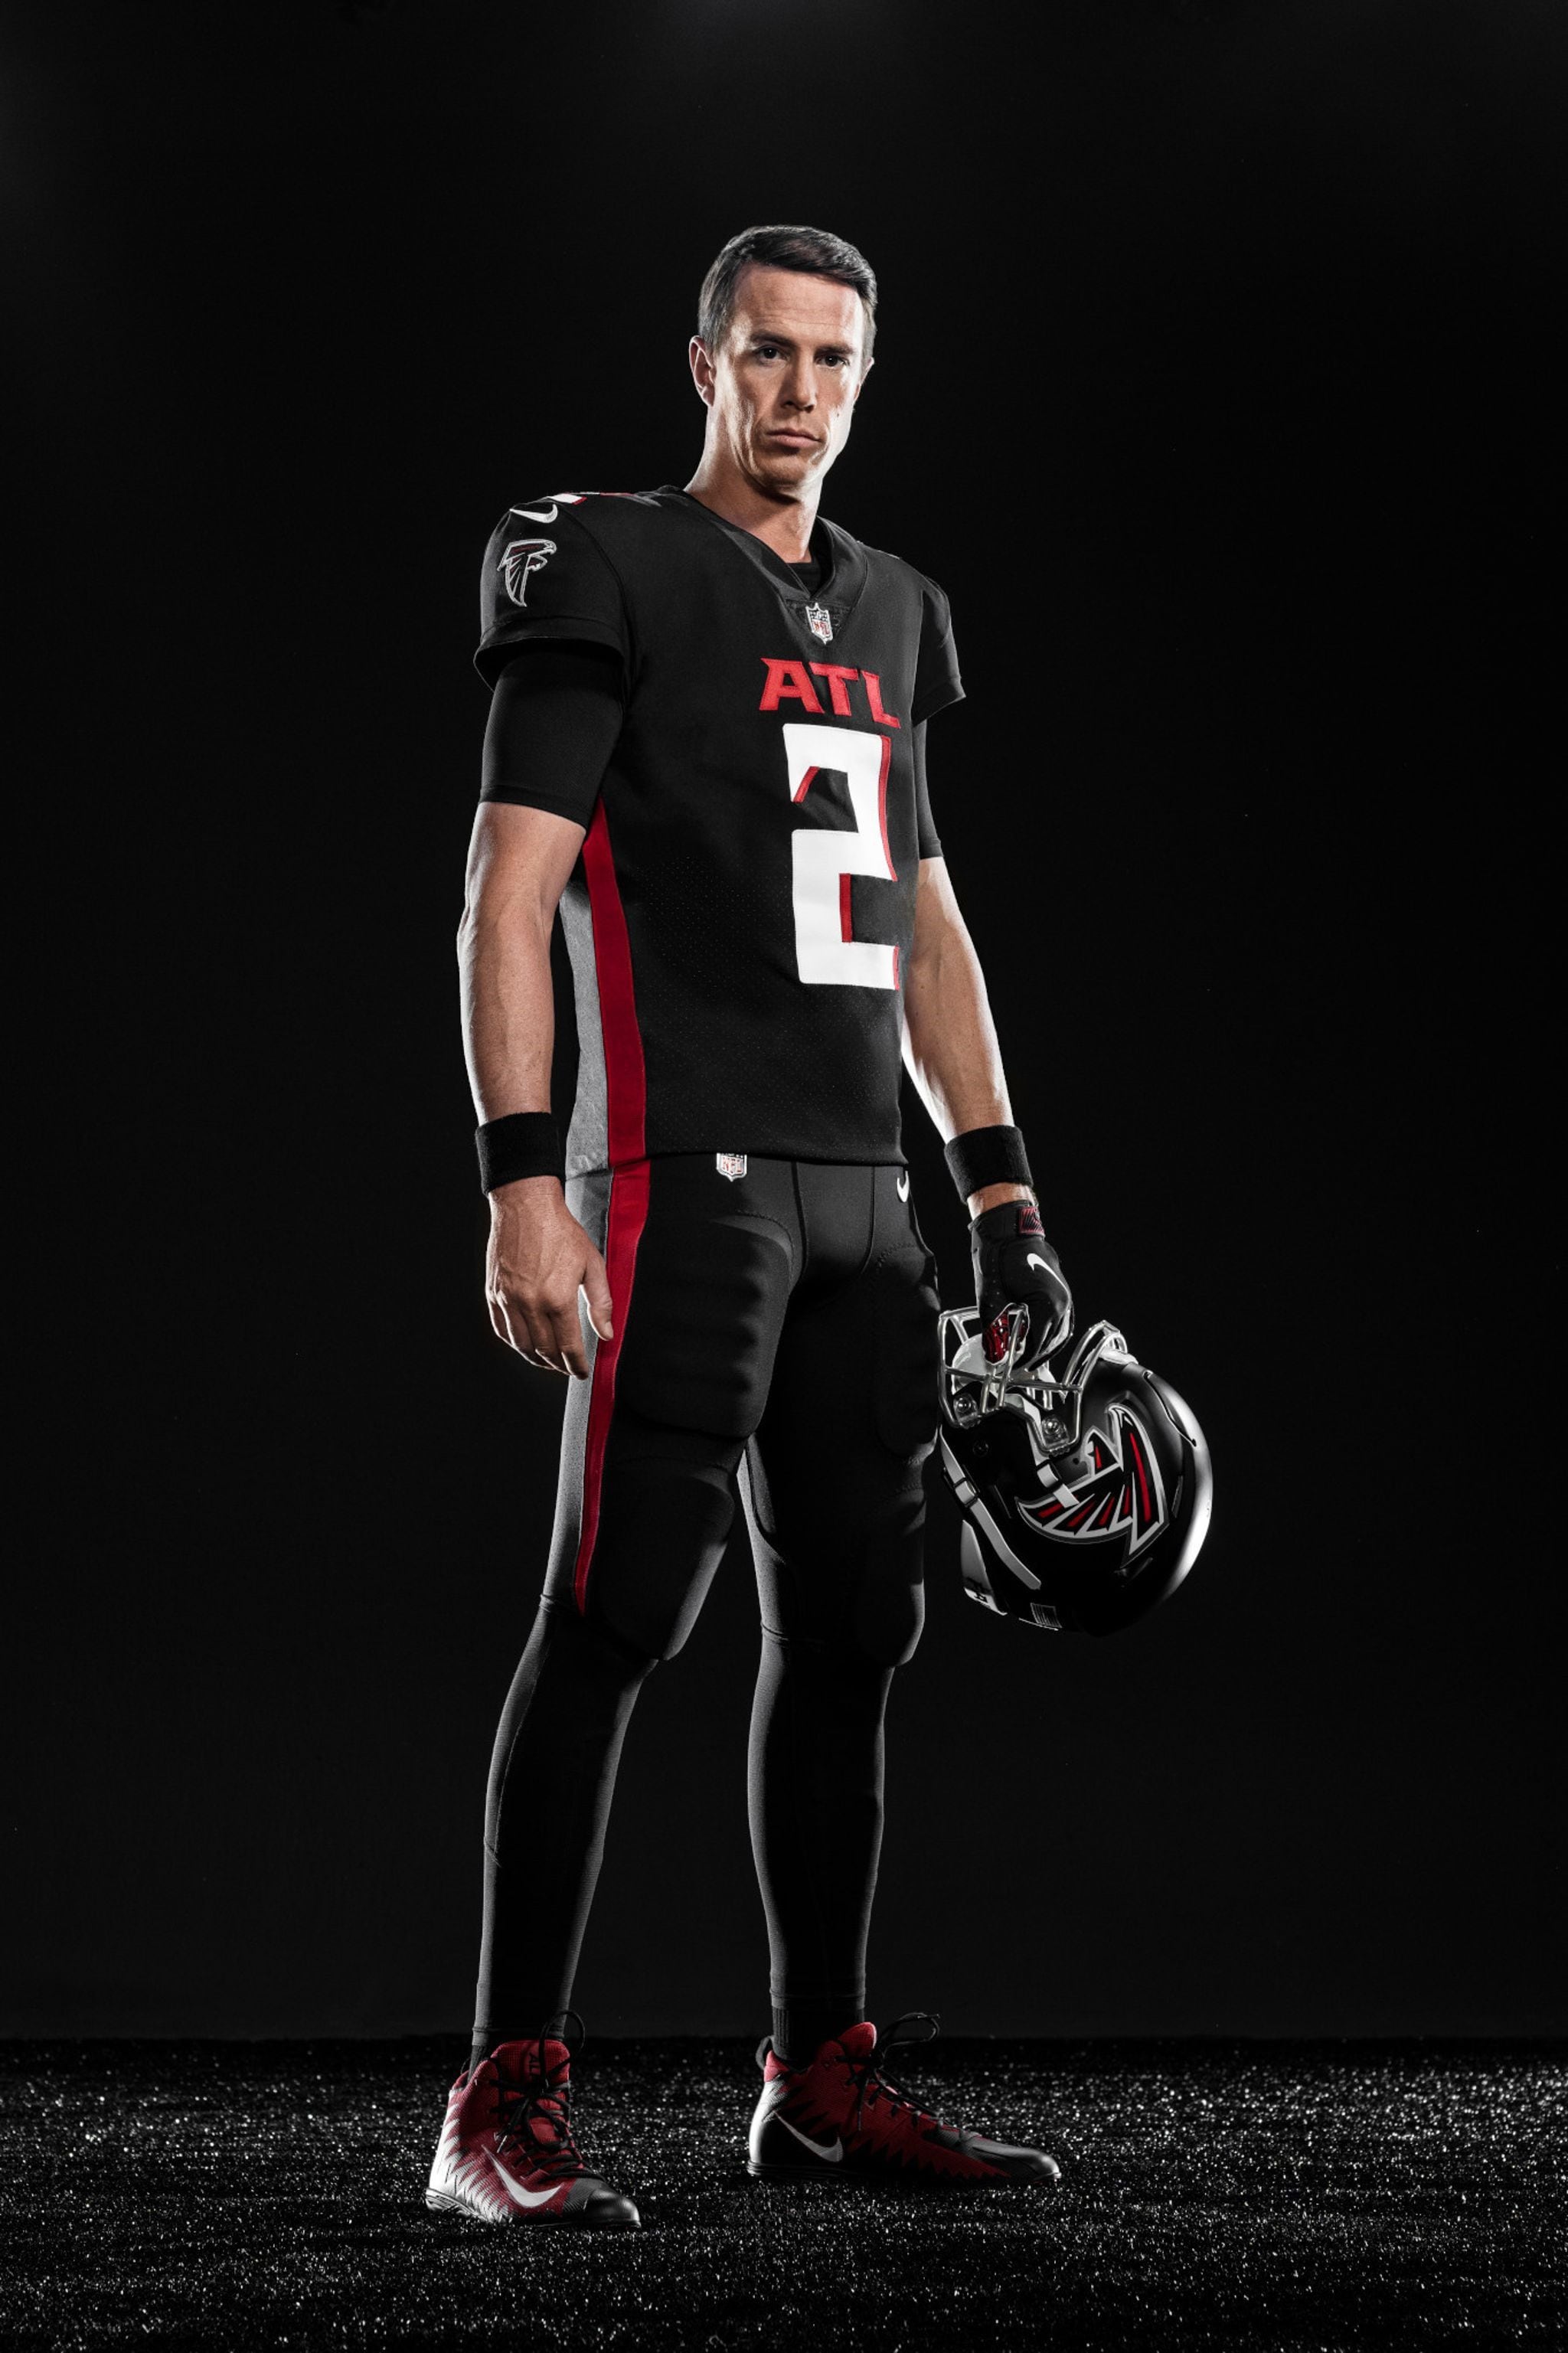 Poll: What do you think of the Falcons' gradient jerseys?